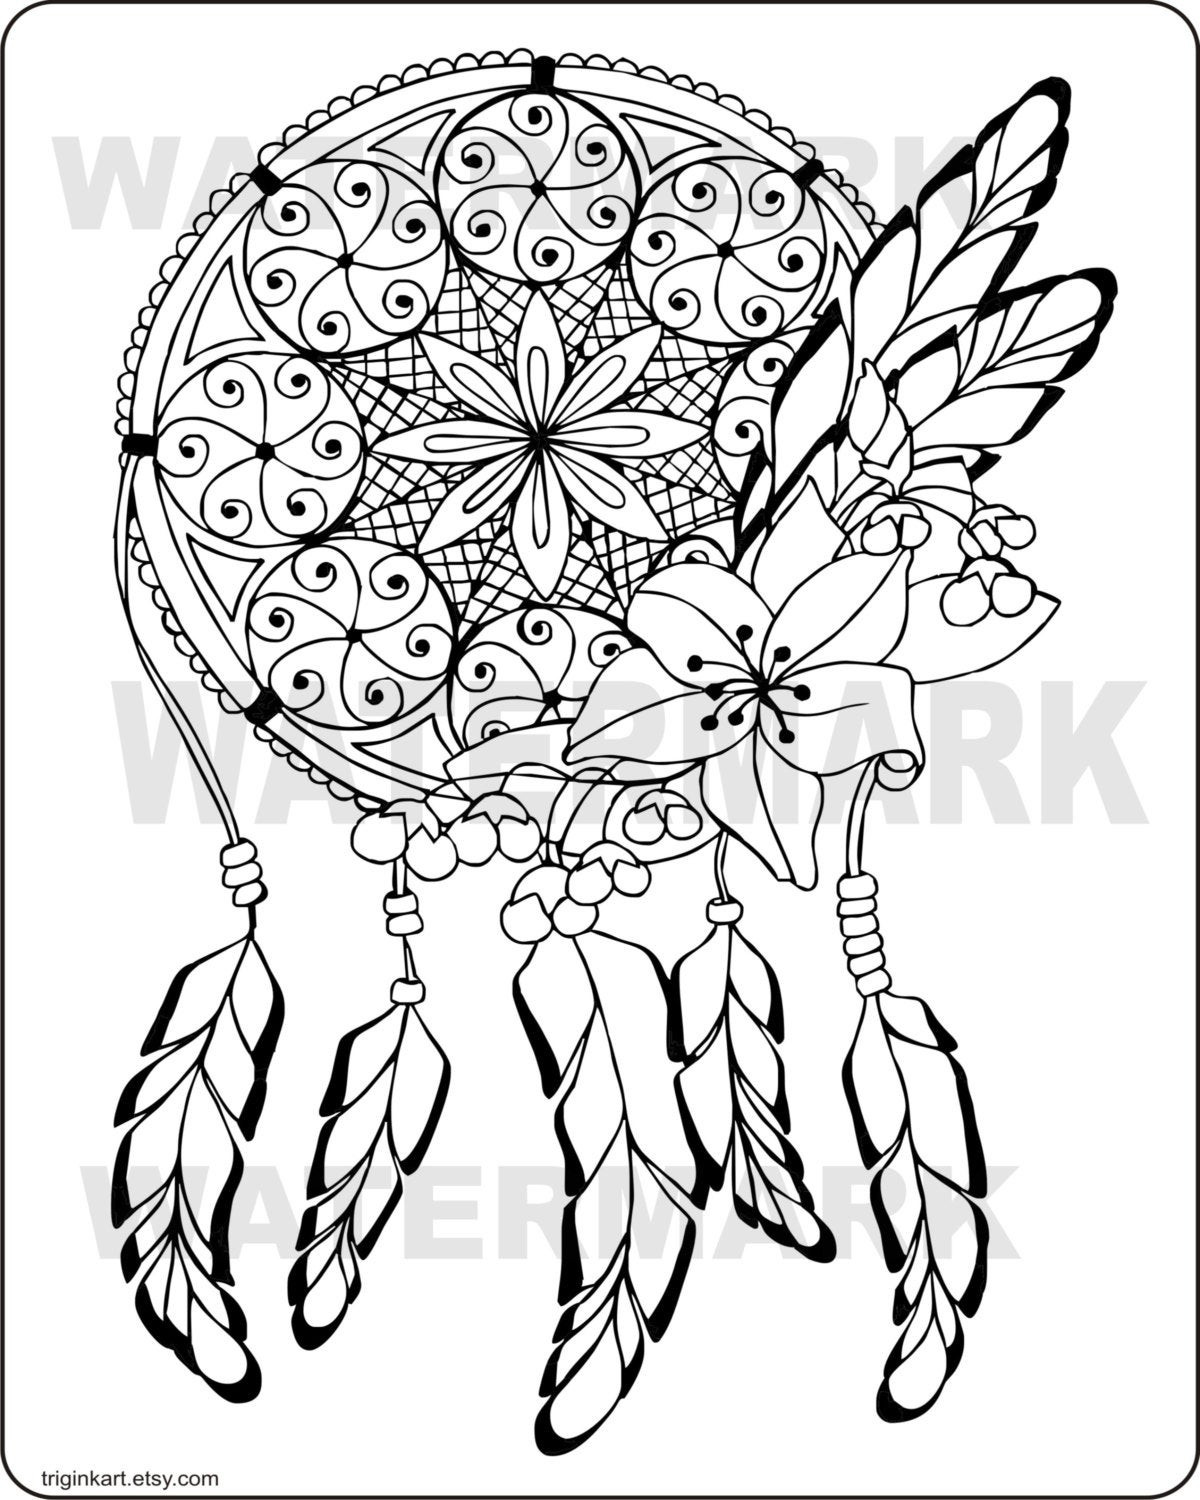 Adult Coloring Book Images
 Dream Catcher Adult coloring page